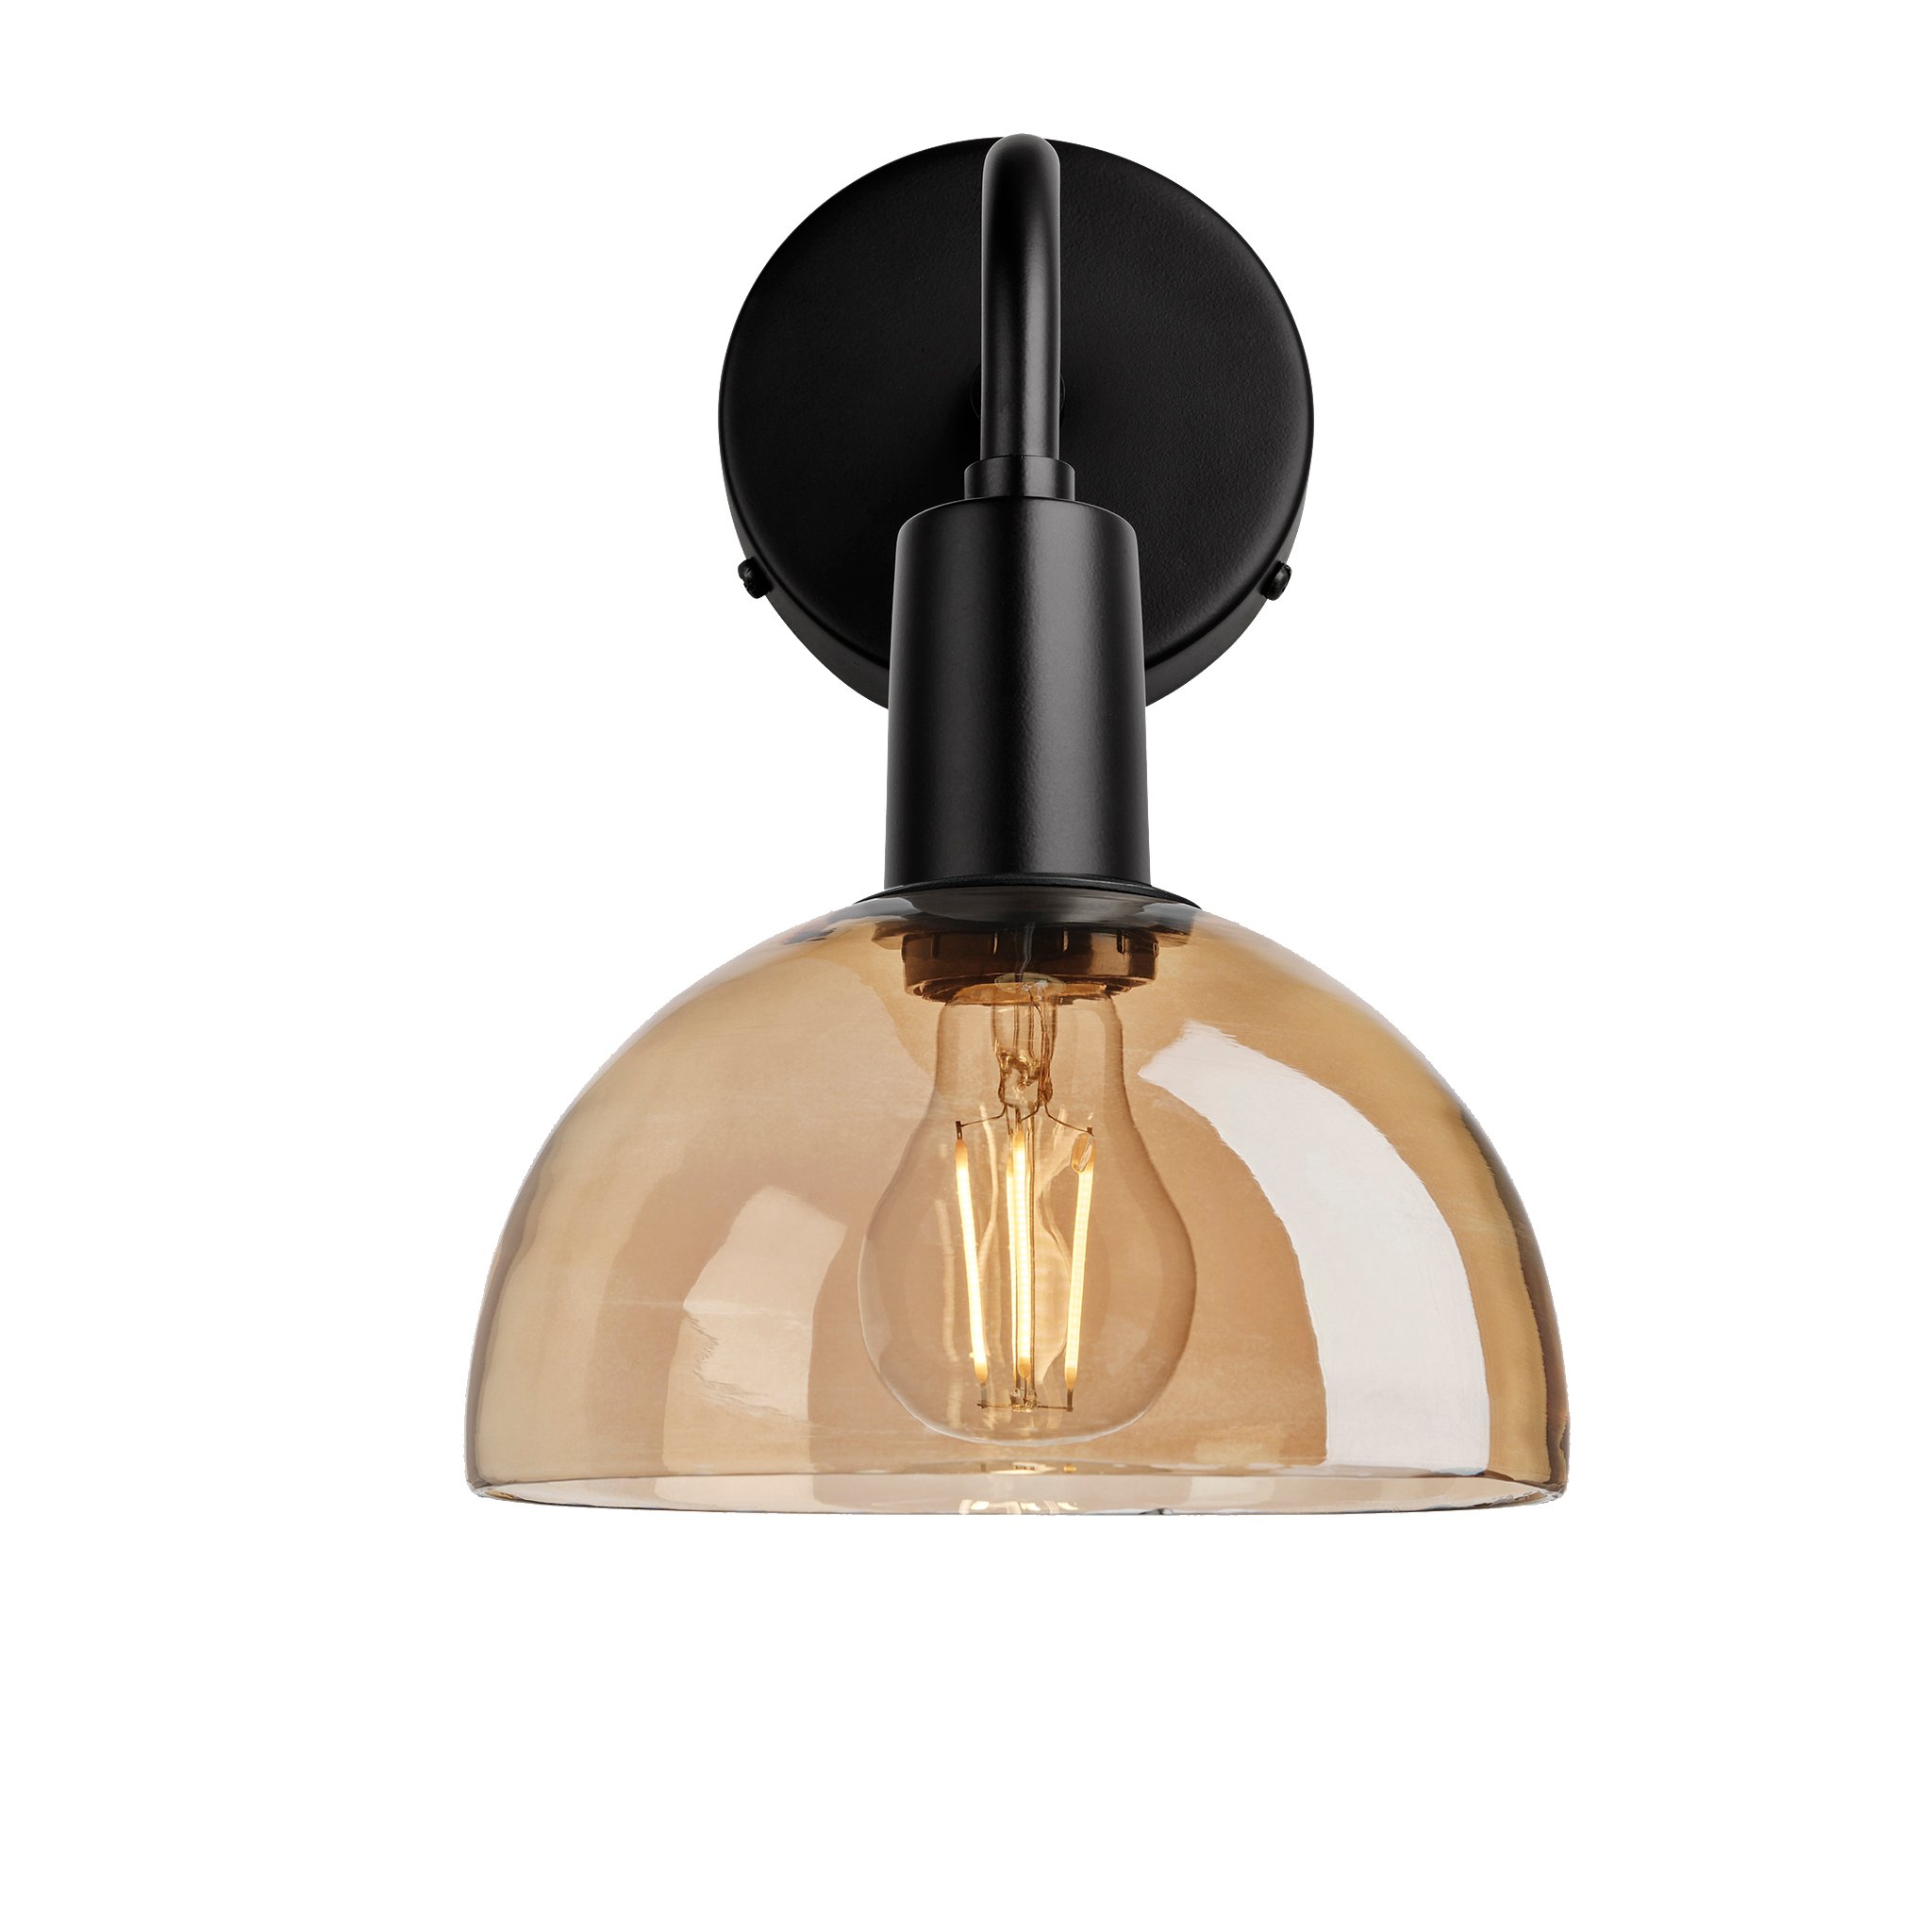 Brooklyn Tinted Glass Dome Wall Light - 8 Inch - Amber - Black Holder